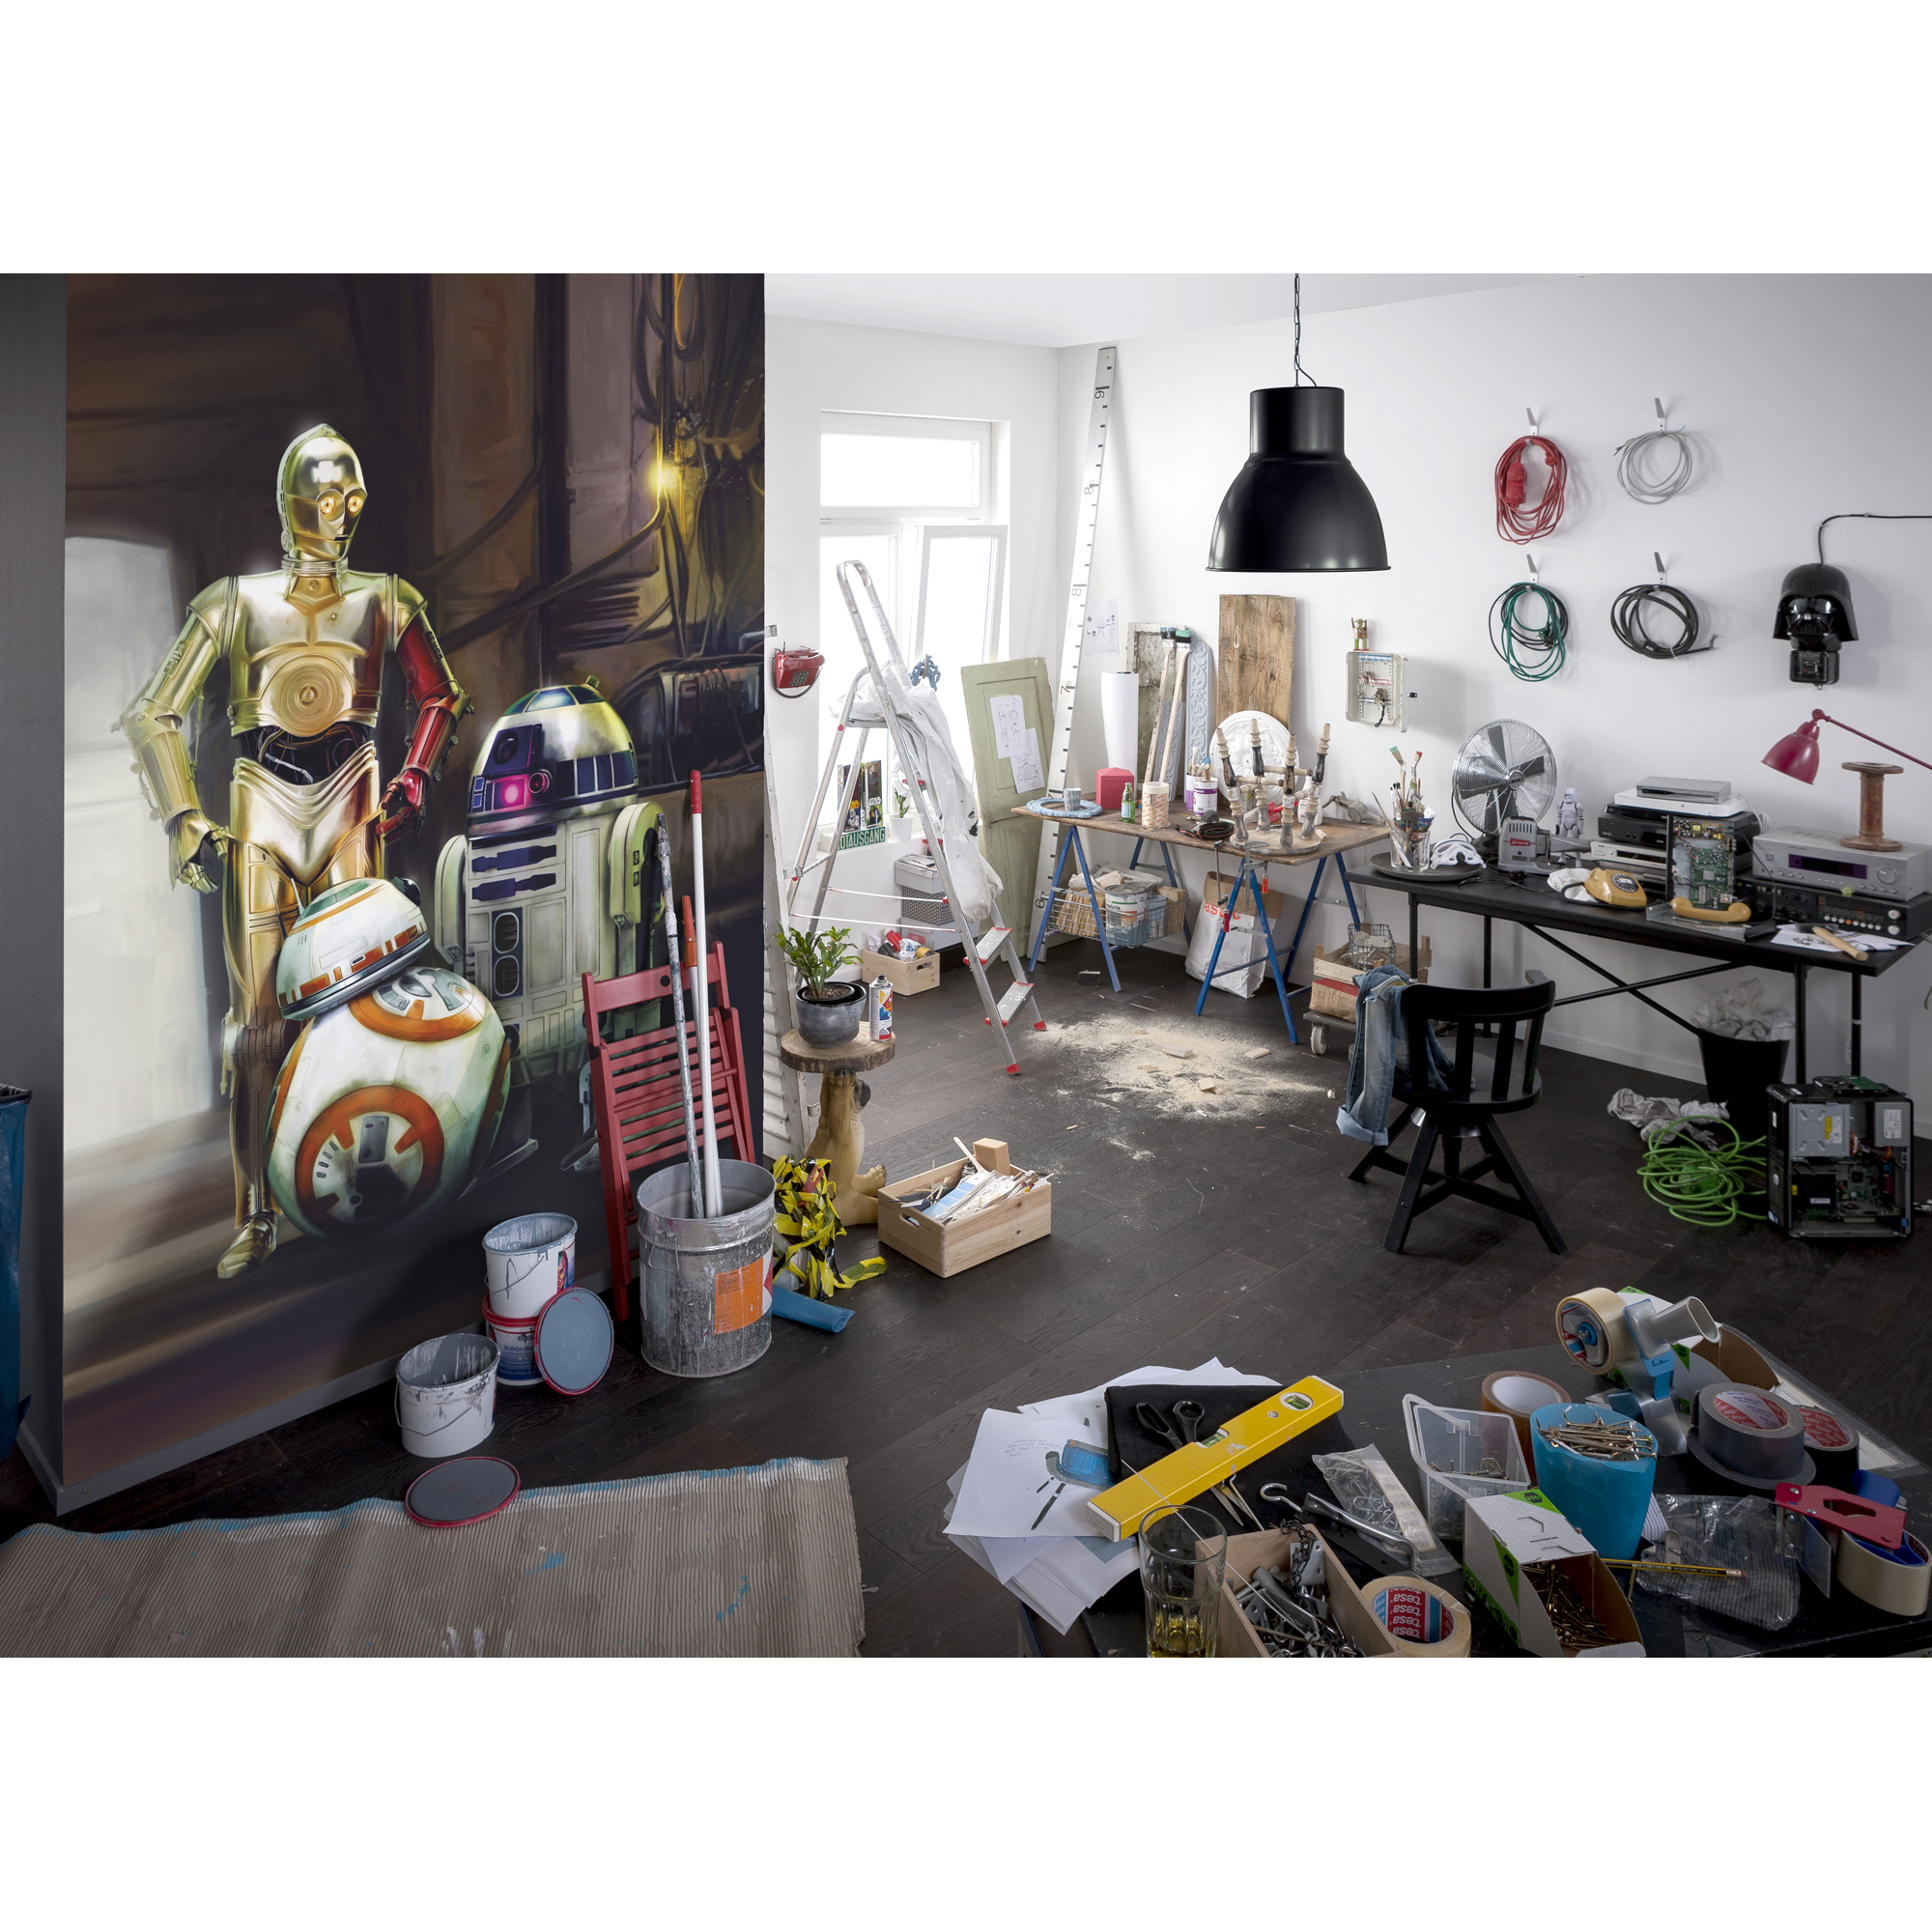 Fototapete 'Star Wars Three Droids' 184 x 254 cm + product picture